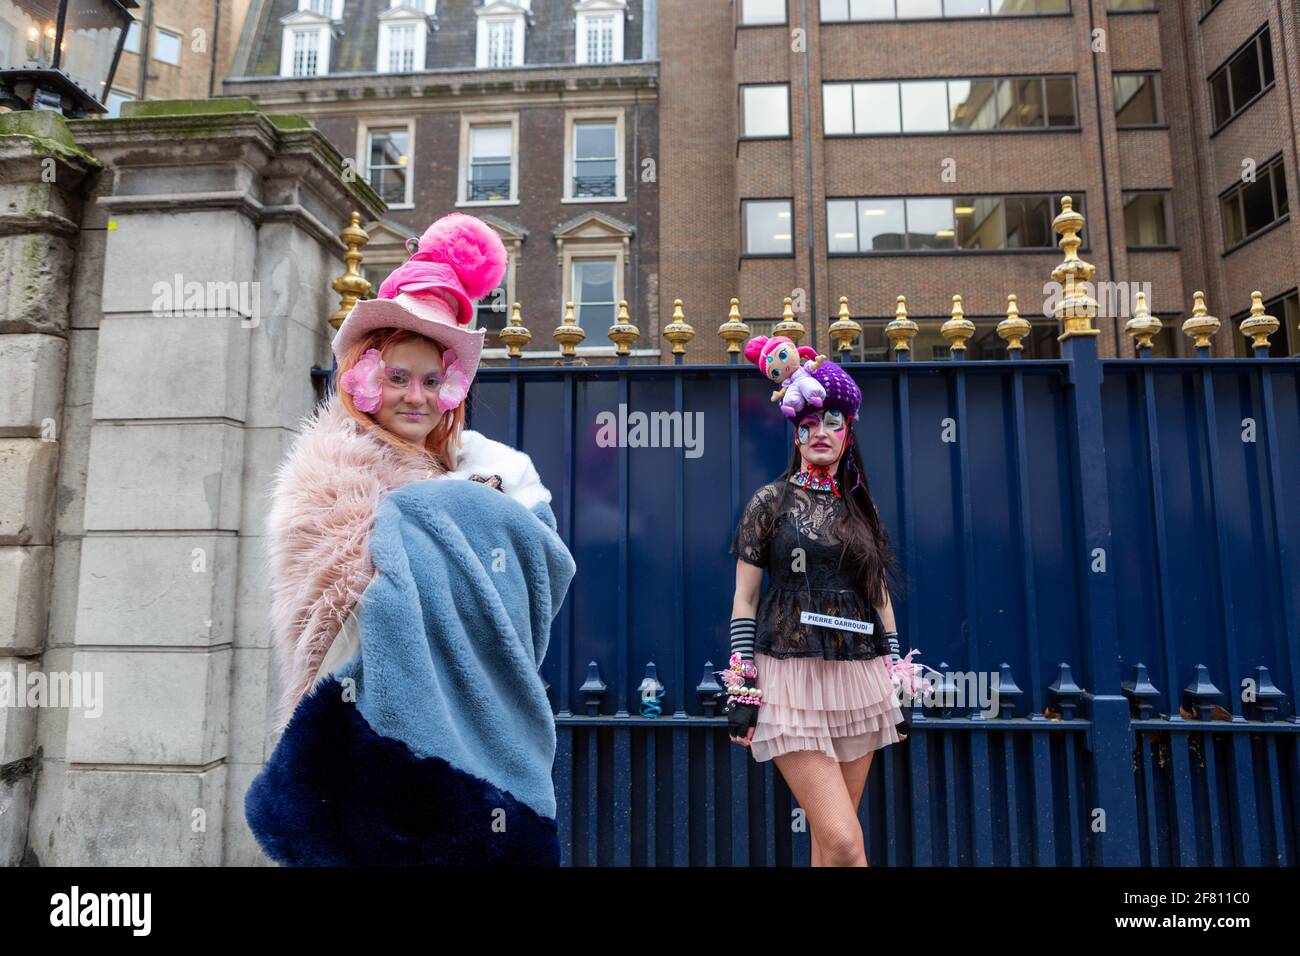 Models showcase Pierre Garroudi's latest colourful collection at one of the designer's specialty flash mob fashion shows in Central London. Stock Photo